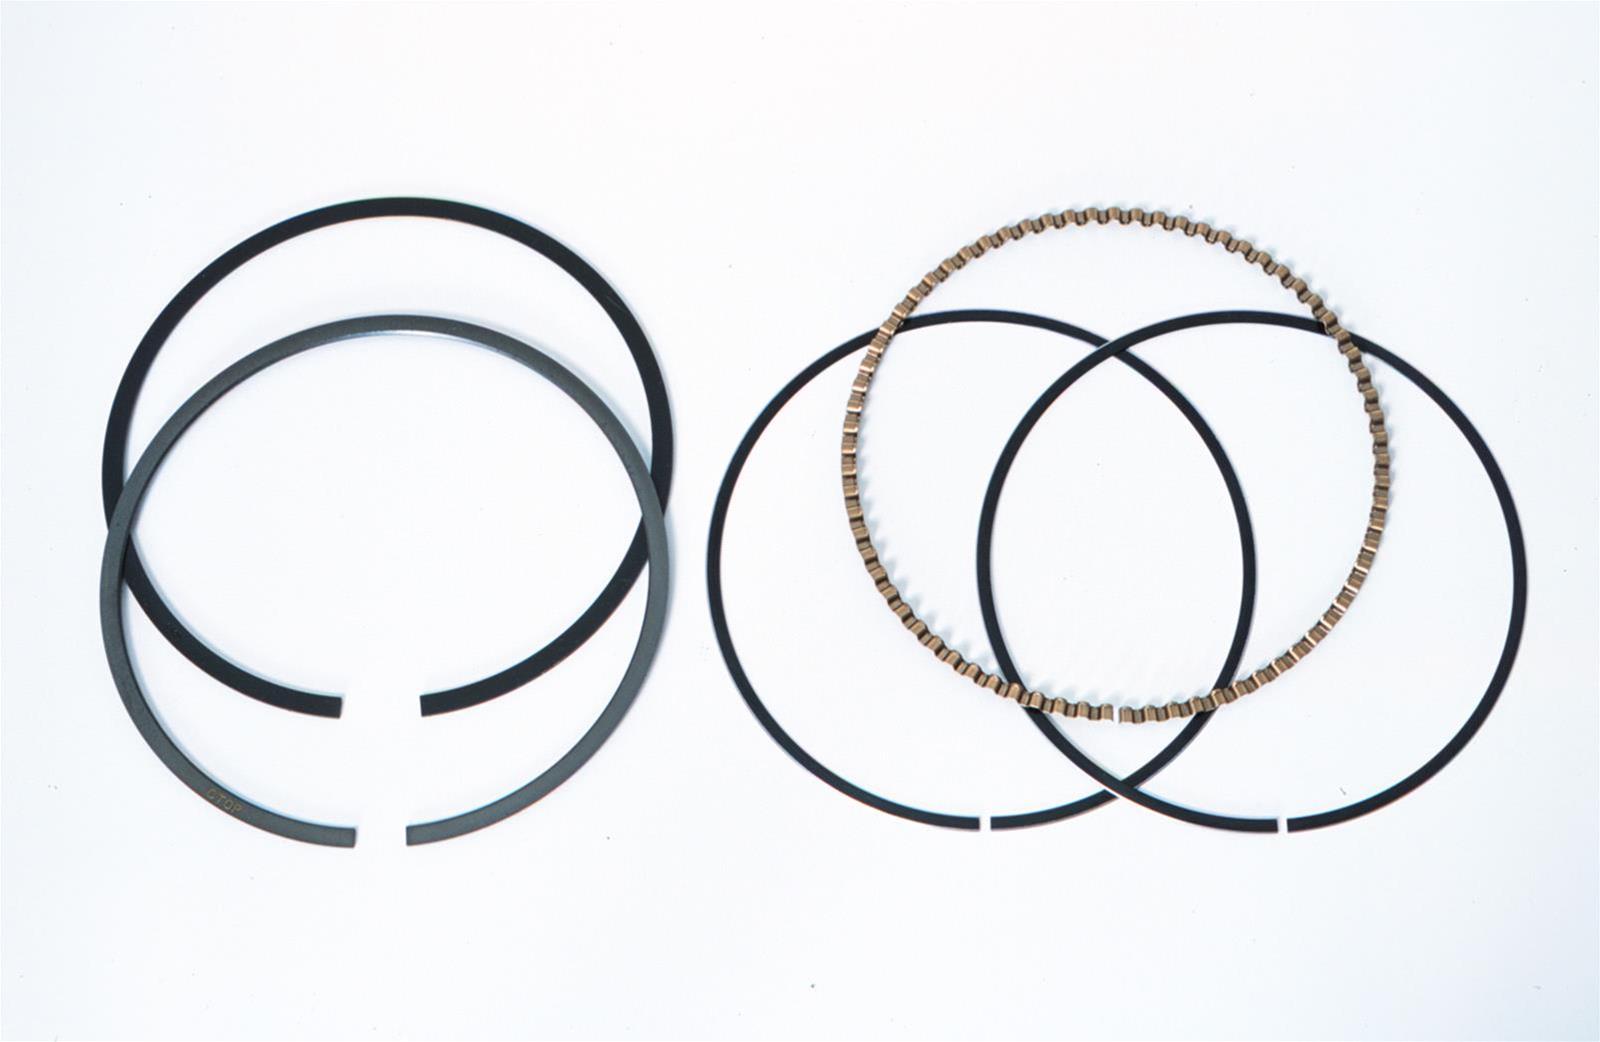 A Comprehensive Guide to the Classification of Piston Rings - Knowledge